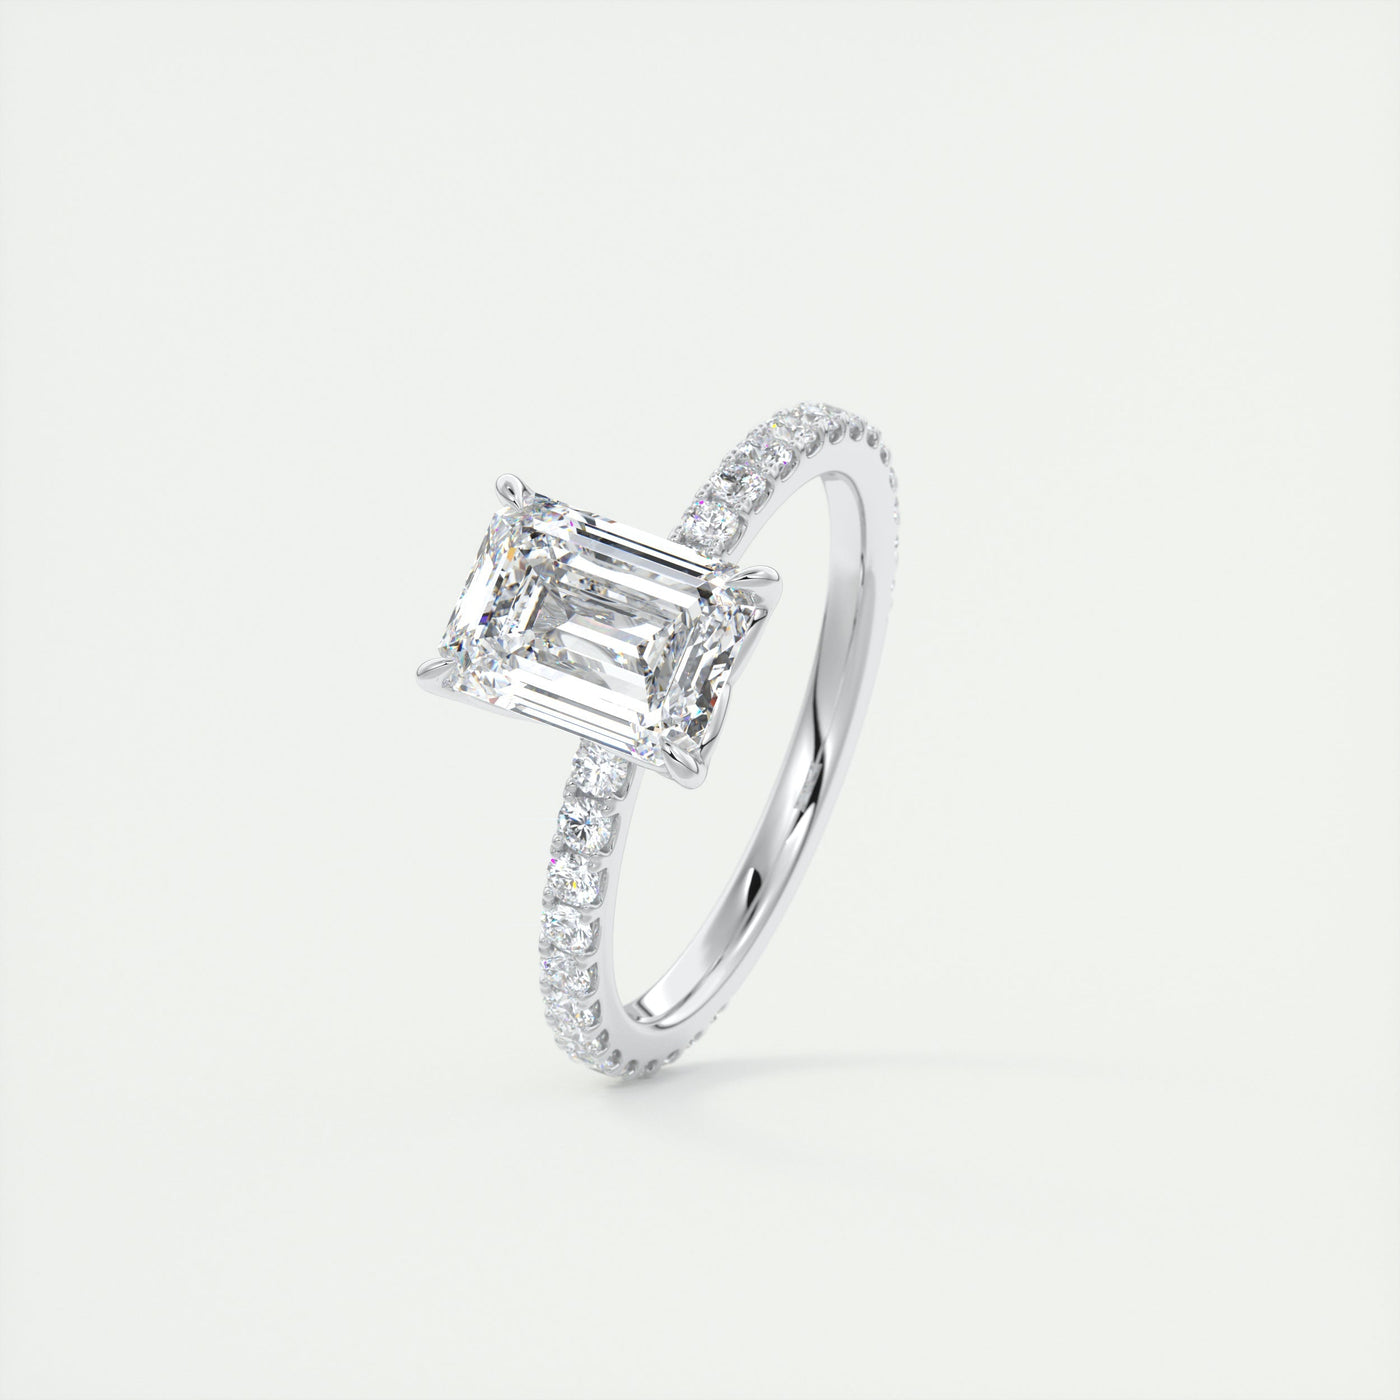 2 CT Emerald Cut Diamond Moissanite Engagement Ring With Pave Setting